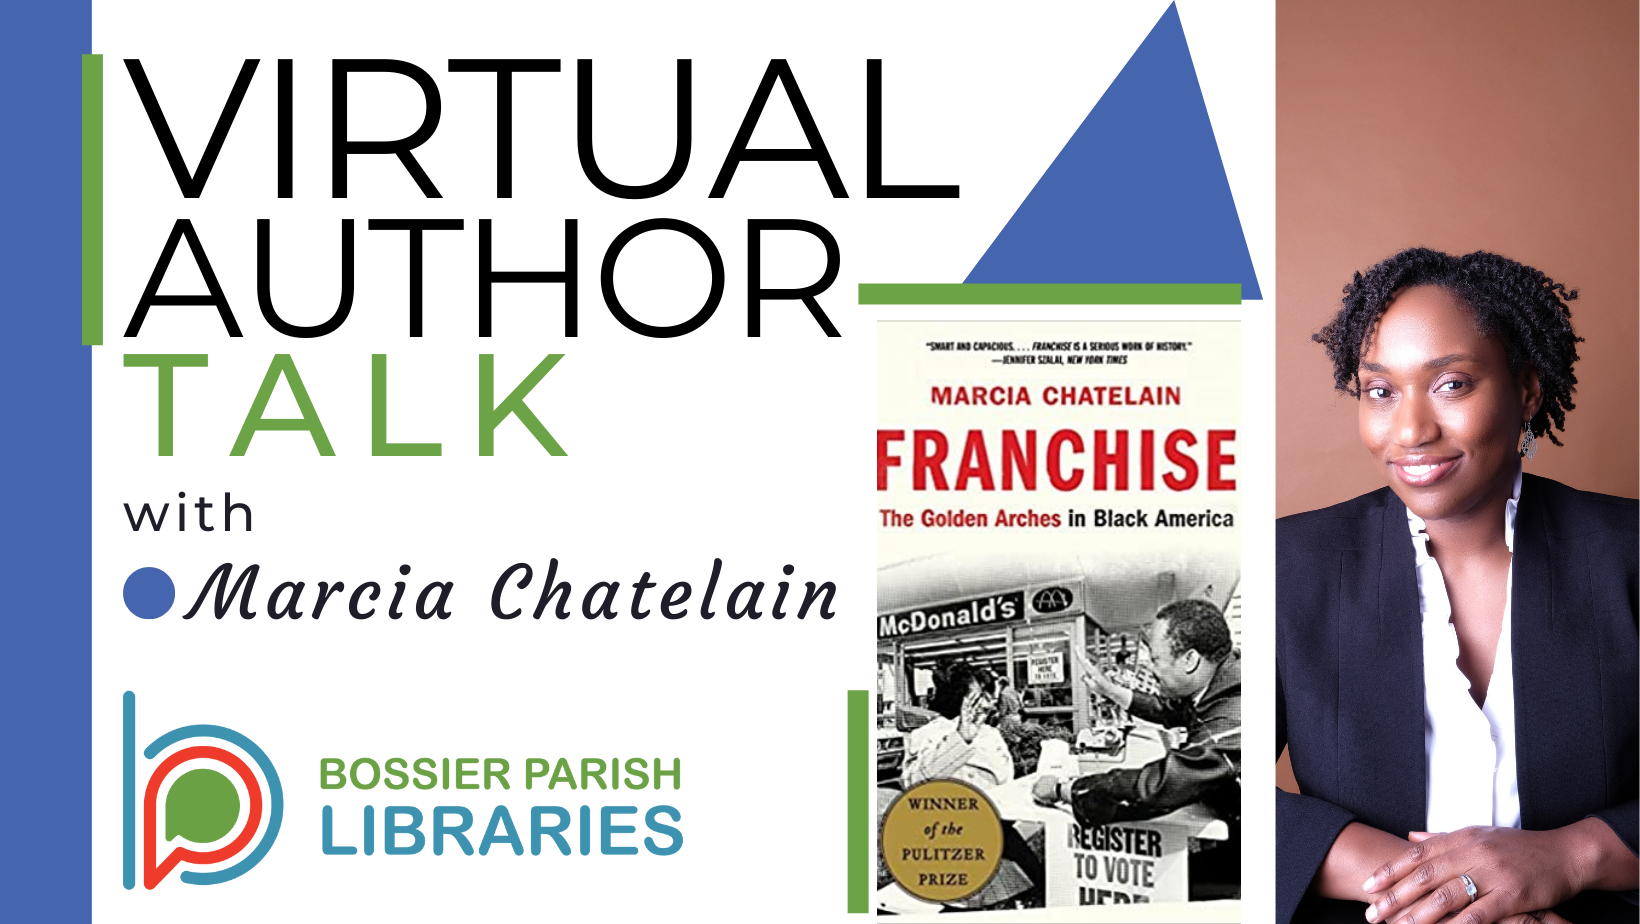 Virtual Author Talk with Marcia Chatelain